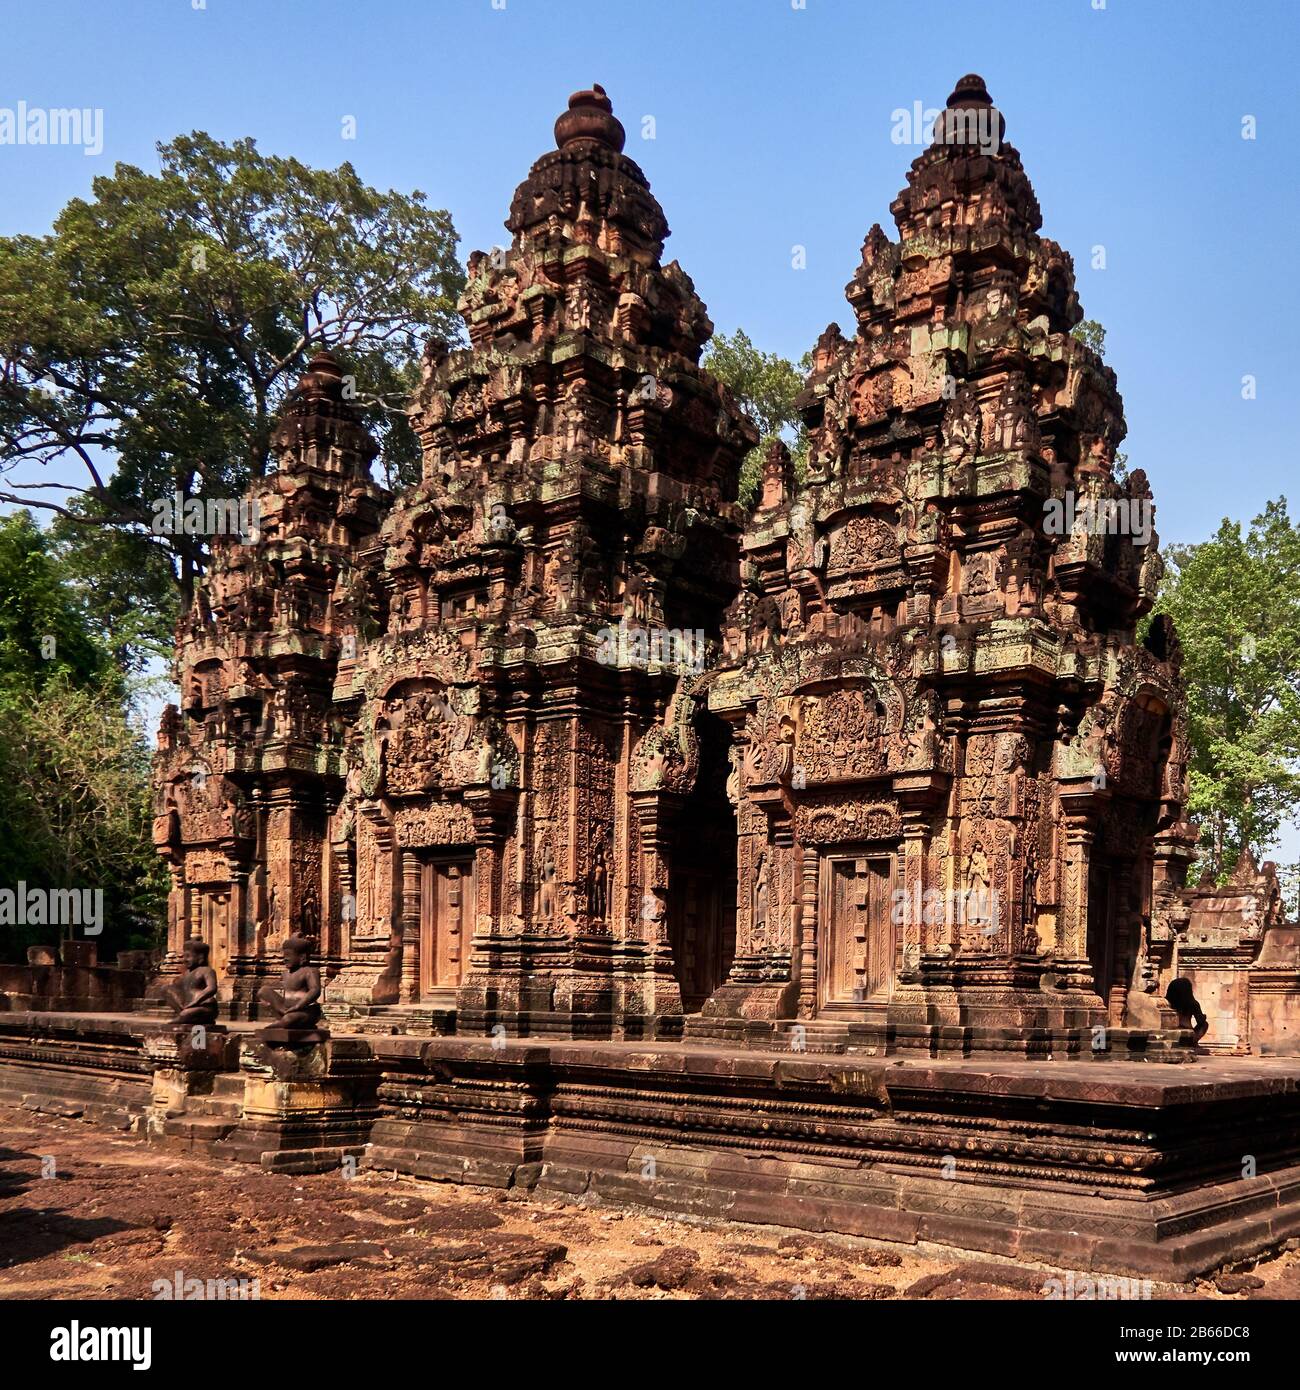 Cambodia, in north of Angkor, Cambodia. Banteay Srei (or Banteay Srey, meaning Citadel of women) is a 10th century Cambodian temple, built largely of red sandstone, and dedicated to the Hindu god Shiva. Angkor used to be the seat of the Khmer empire, which flourished from approximately the ninth century to the thirteenth century. The ruins of Angkor temples are a UNESCO World Heritage Site. Stock Photo